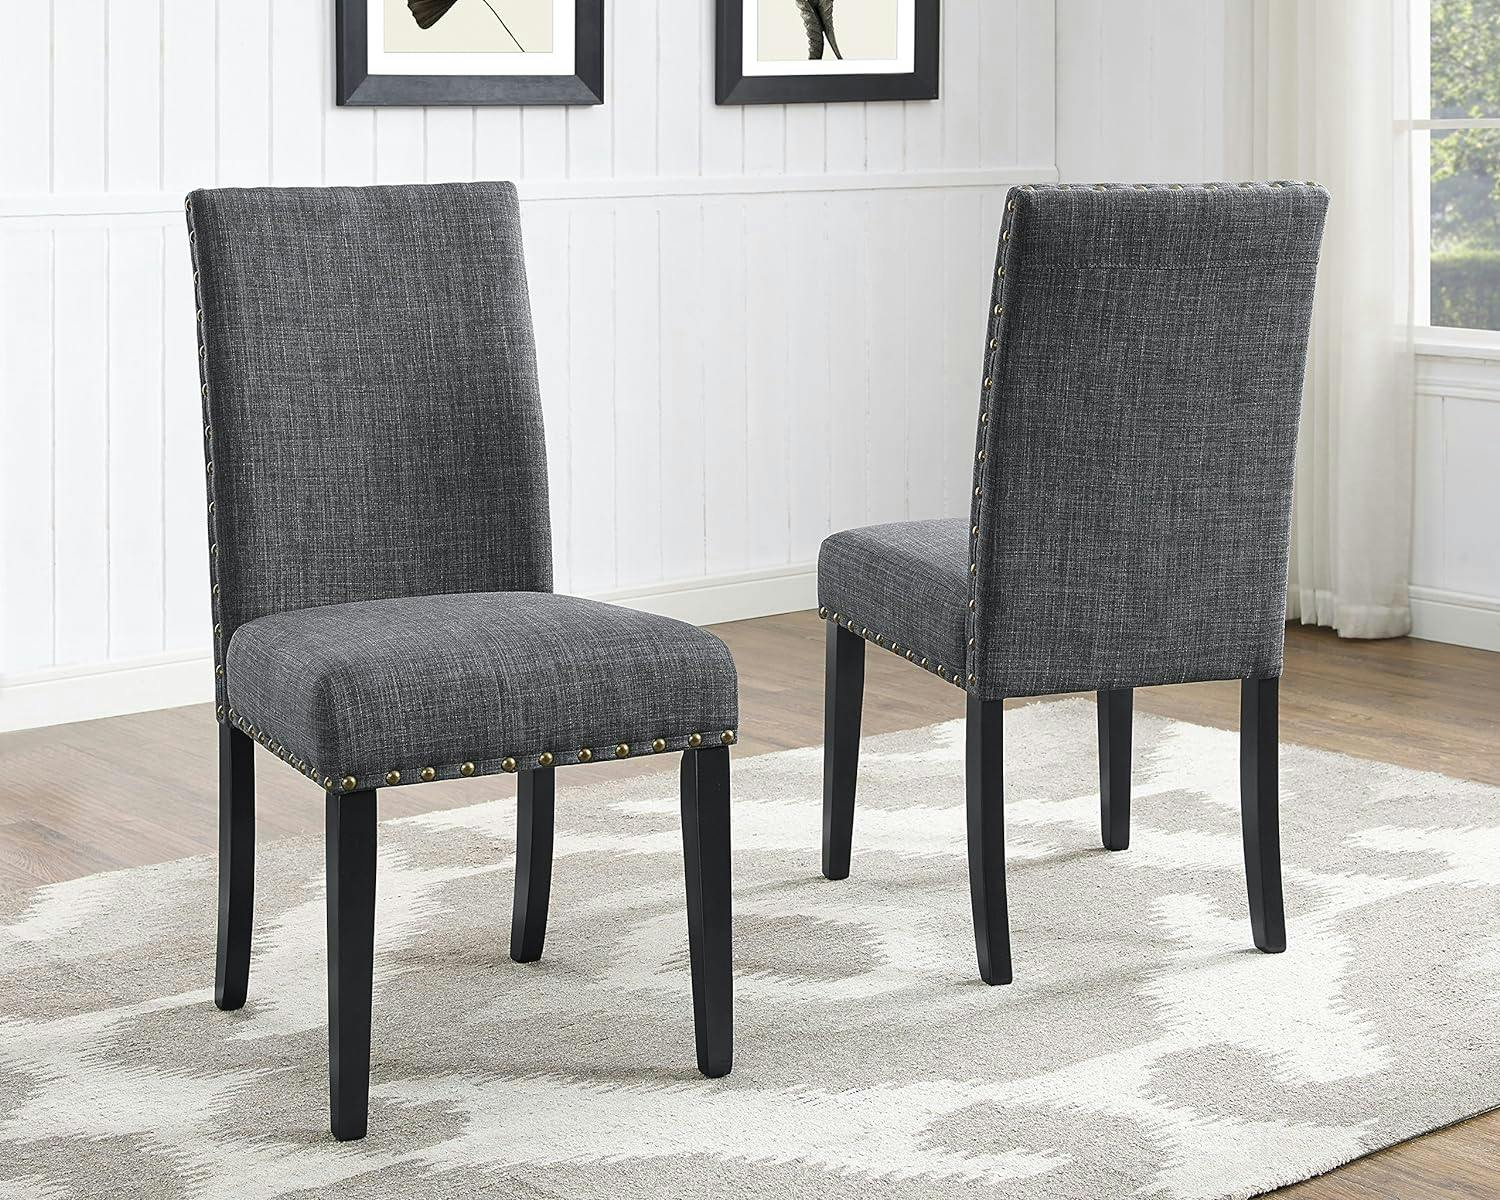 Contemporary Gray Linen Upholstered Dining Chair with Black Wood Legs, Set of 2